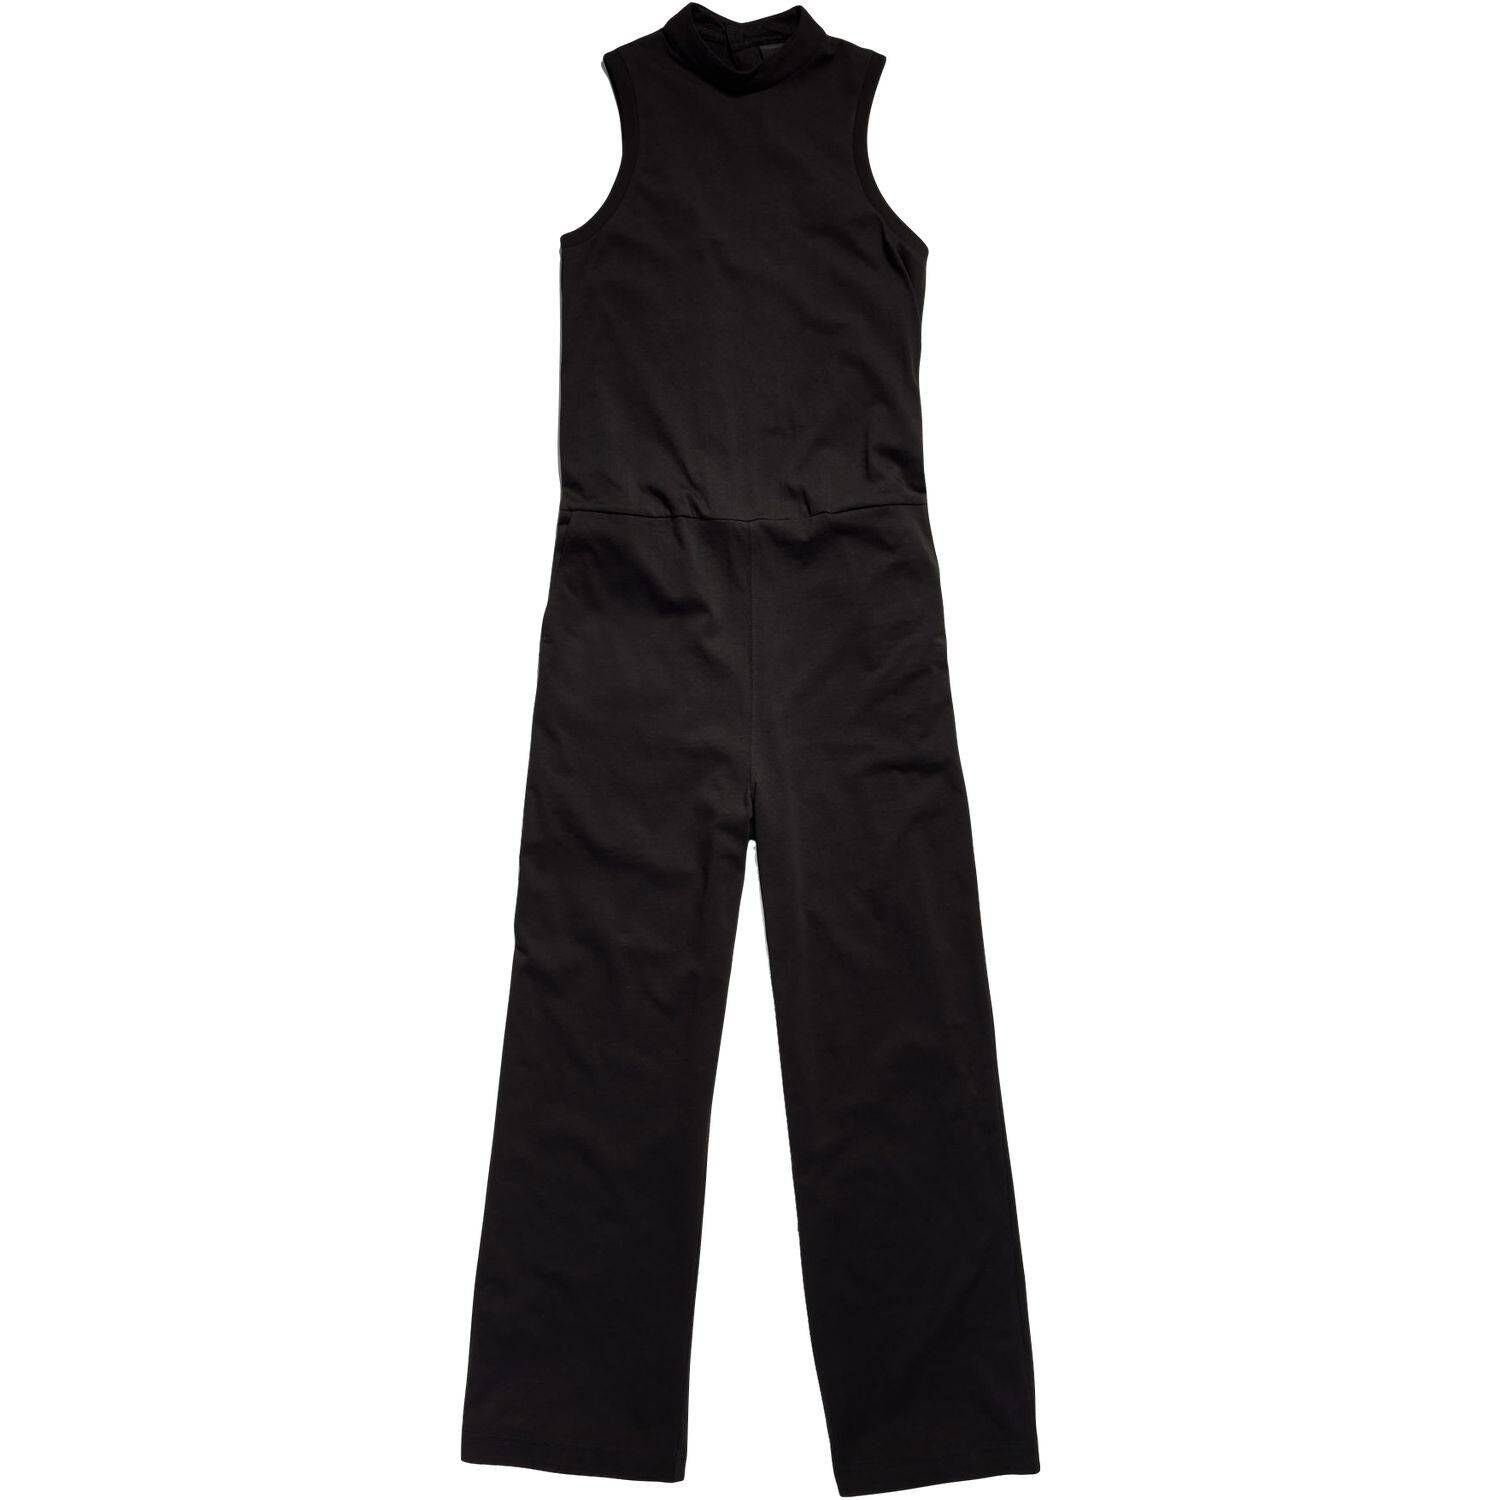 G-Star RAW Overall Open back jumpsuit